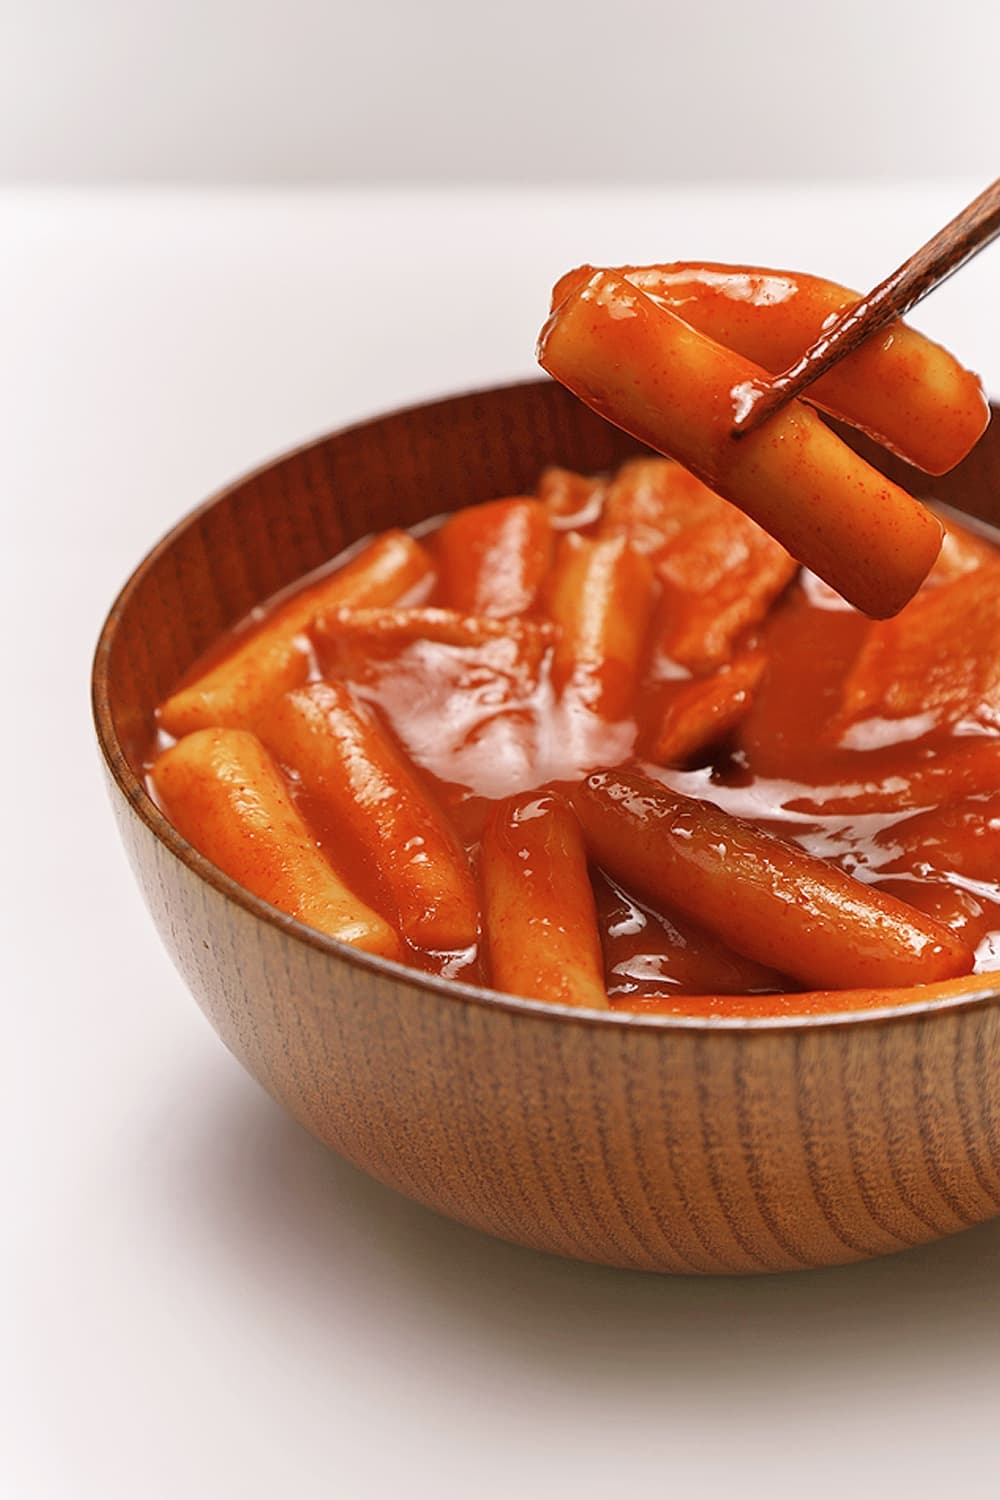 Ormak Tteokbokki original spicy rice cake frozen instant food fish cake easy and fast to cook